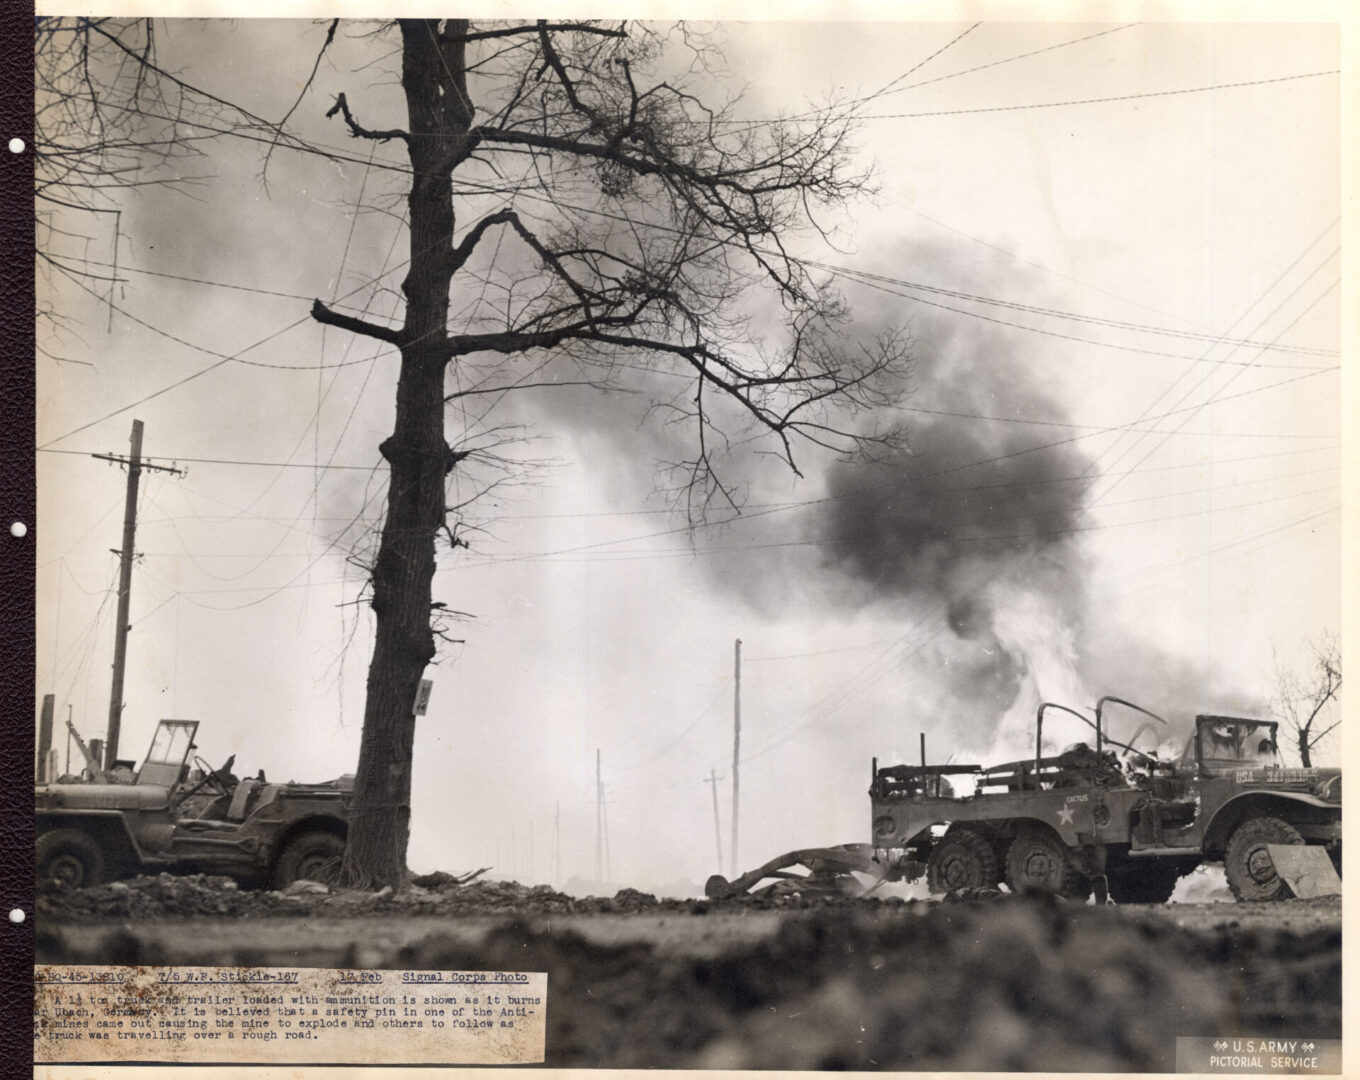 A trailer after being destroyed by an explosion